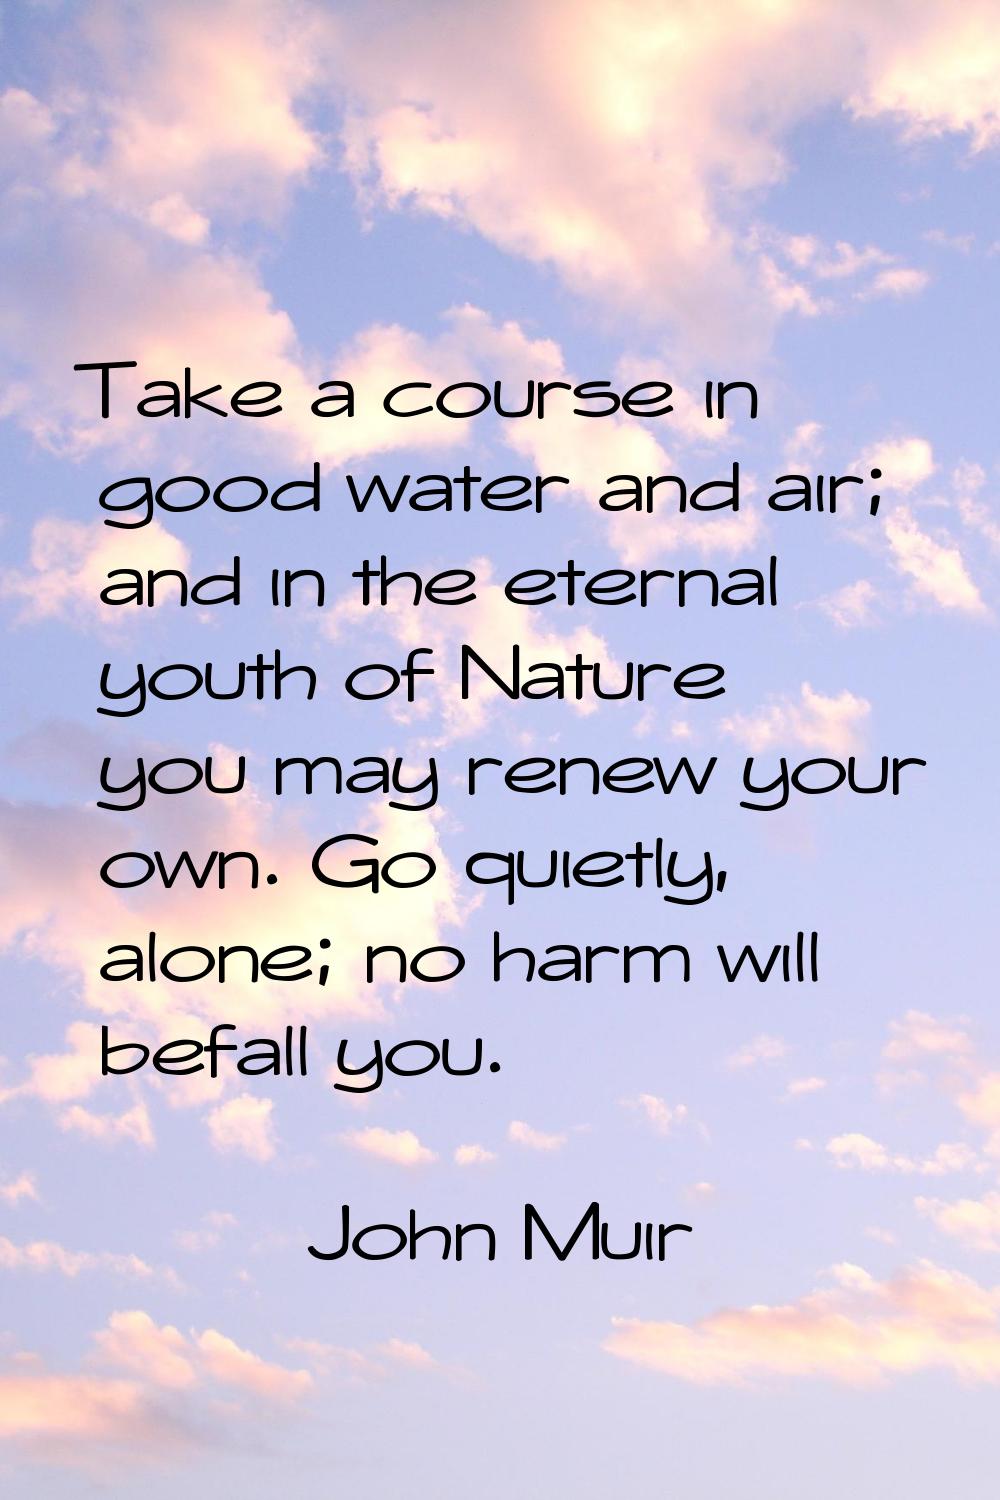 Take a course in good water and air; and in the eternal youth of Nature you may renew your own. Go 